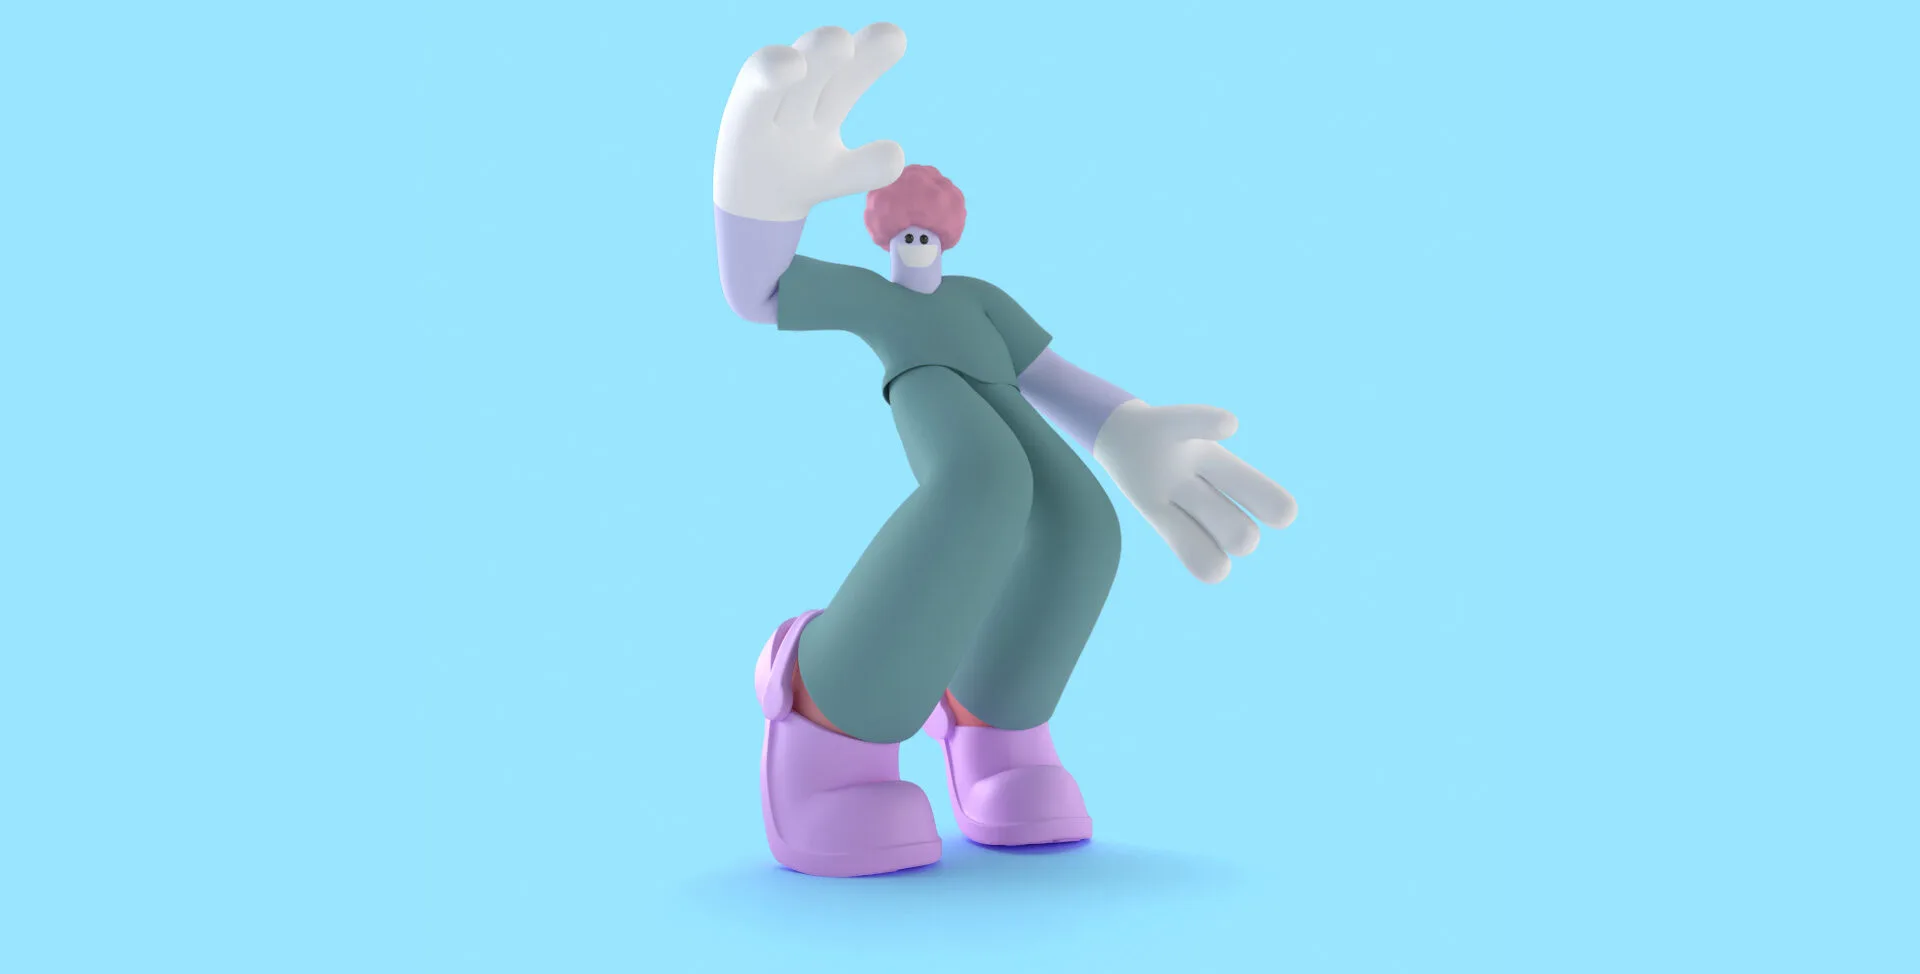 Animated employee dances on a neon blue background